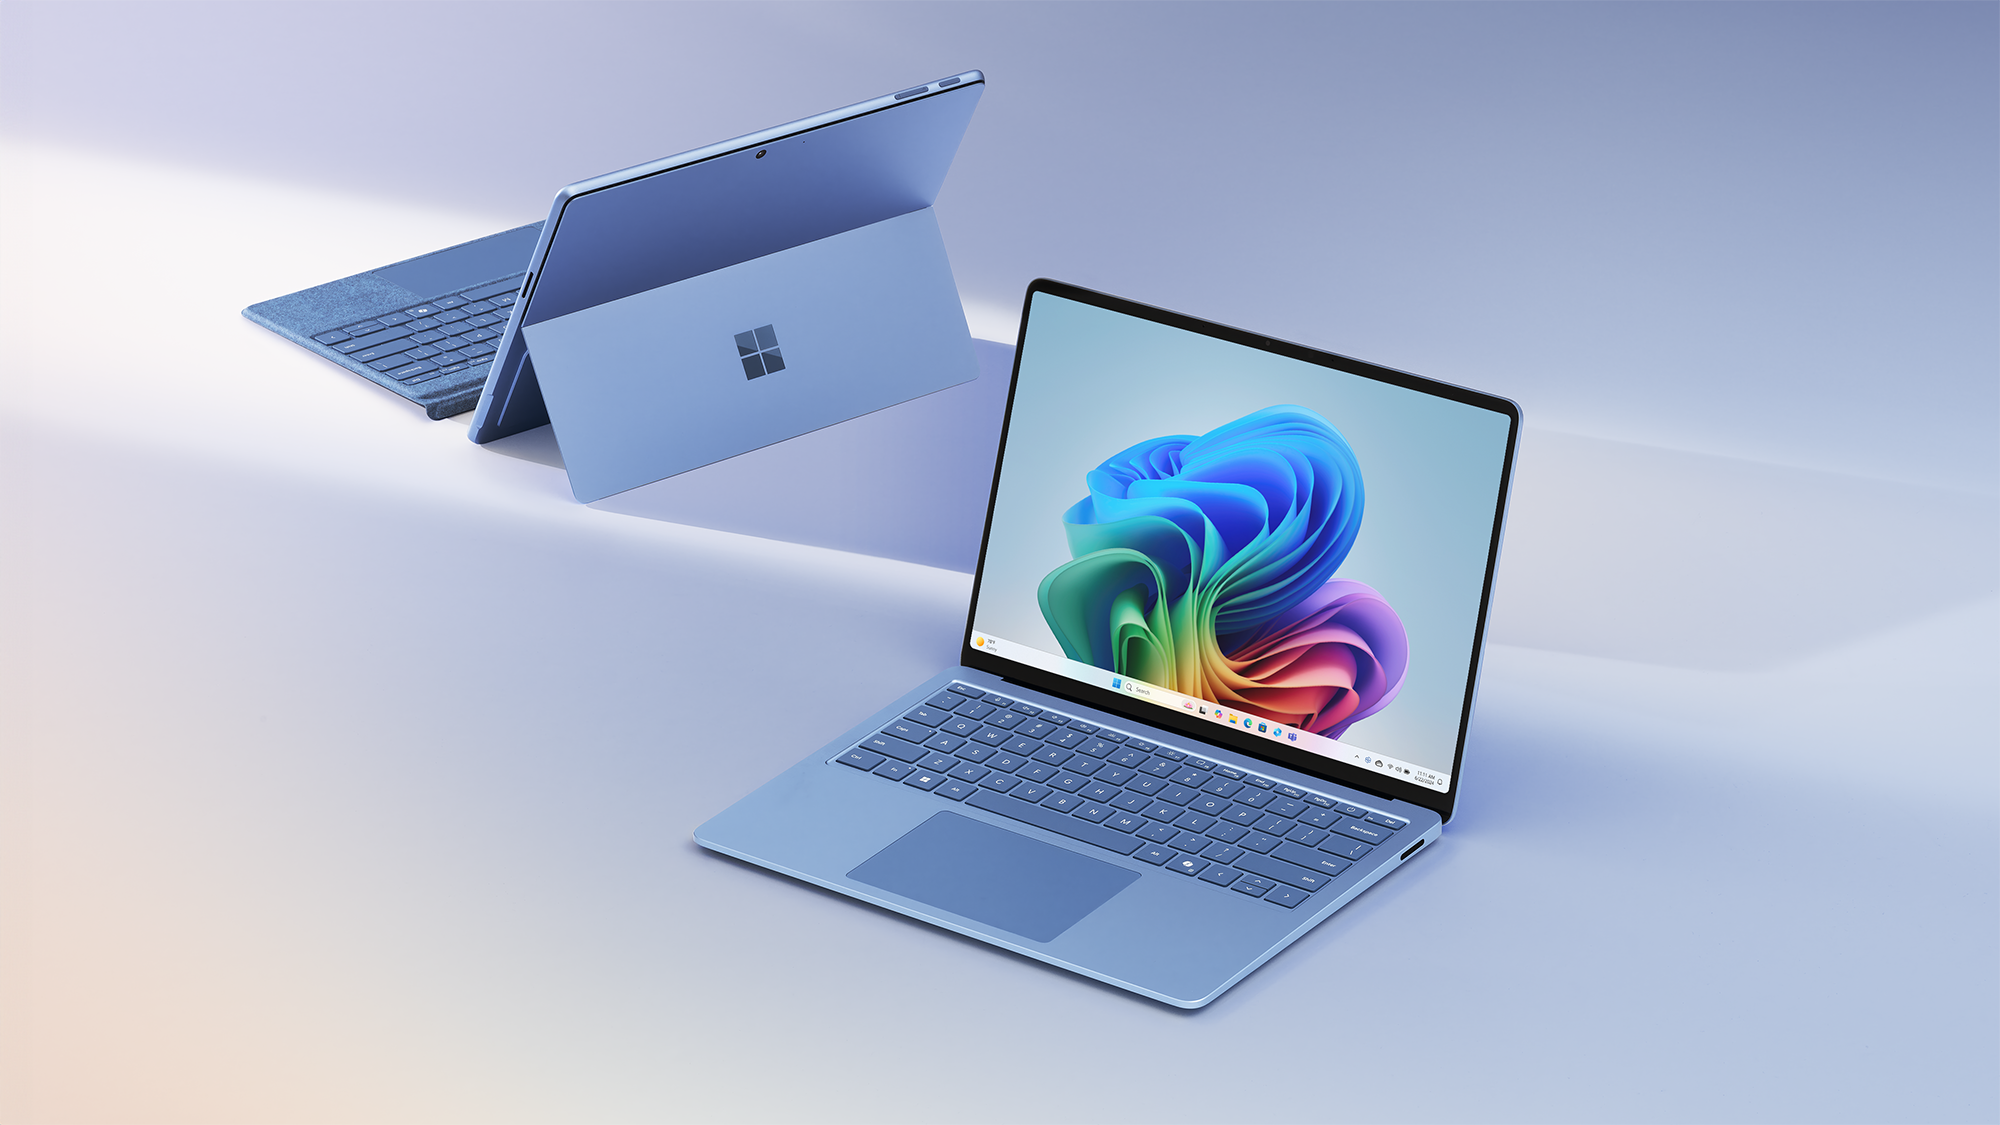 Two Surface devices with an angled back view of a blue Surface Pro including the detached Surface Pro Keyboard and an angled front view of a Surface Laptop opened with the Windows rainbow bloom image on the home screen.